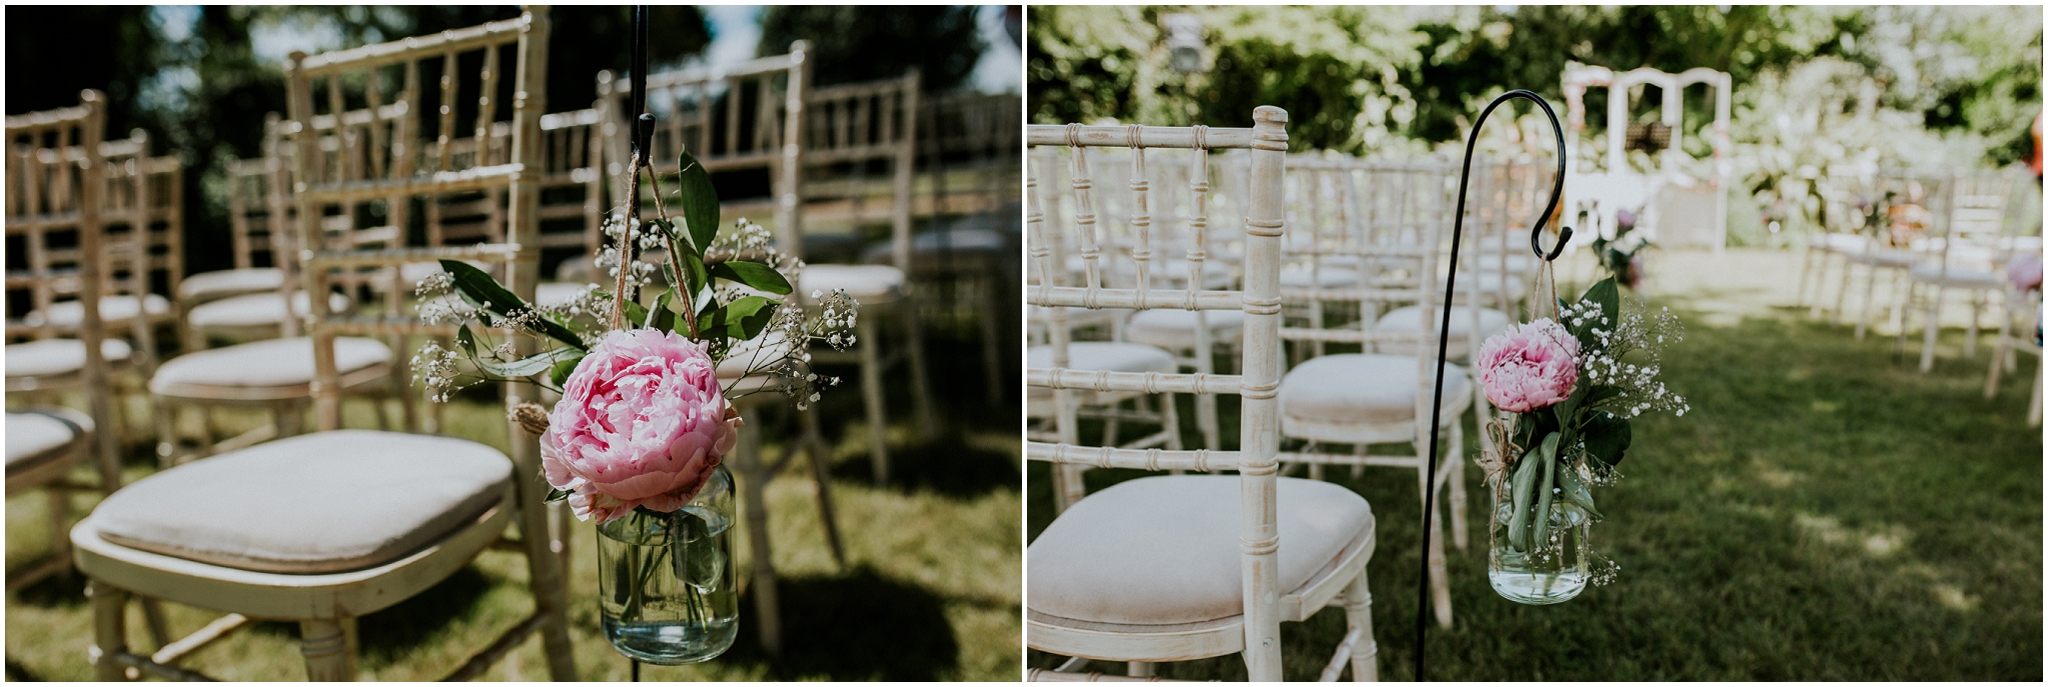 flower arrangements in jars on ceremony chairs